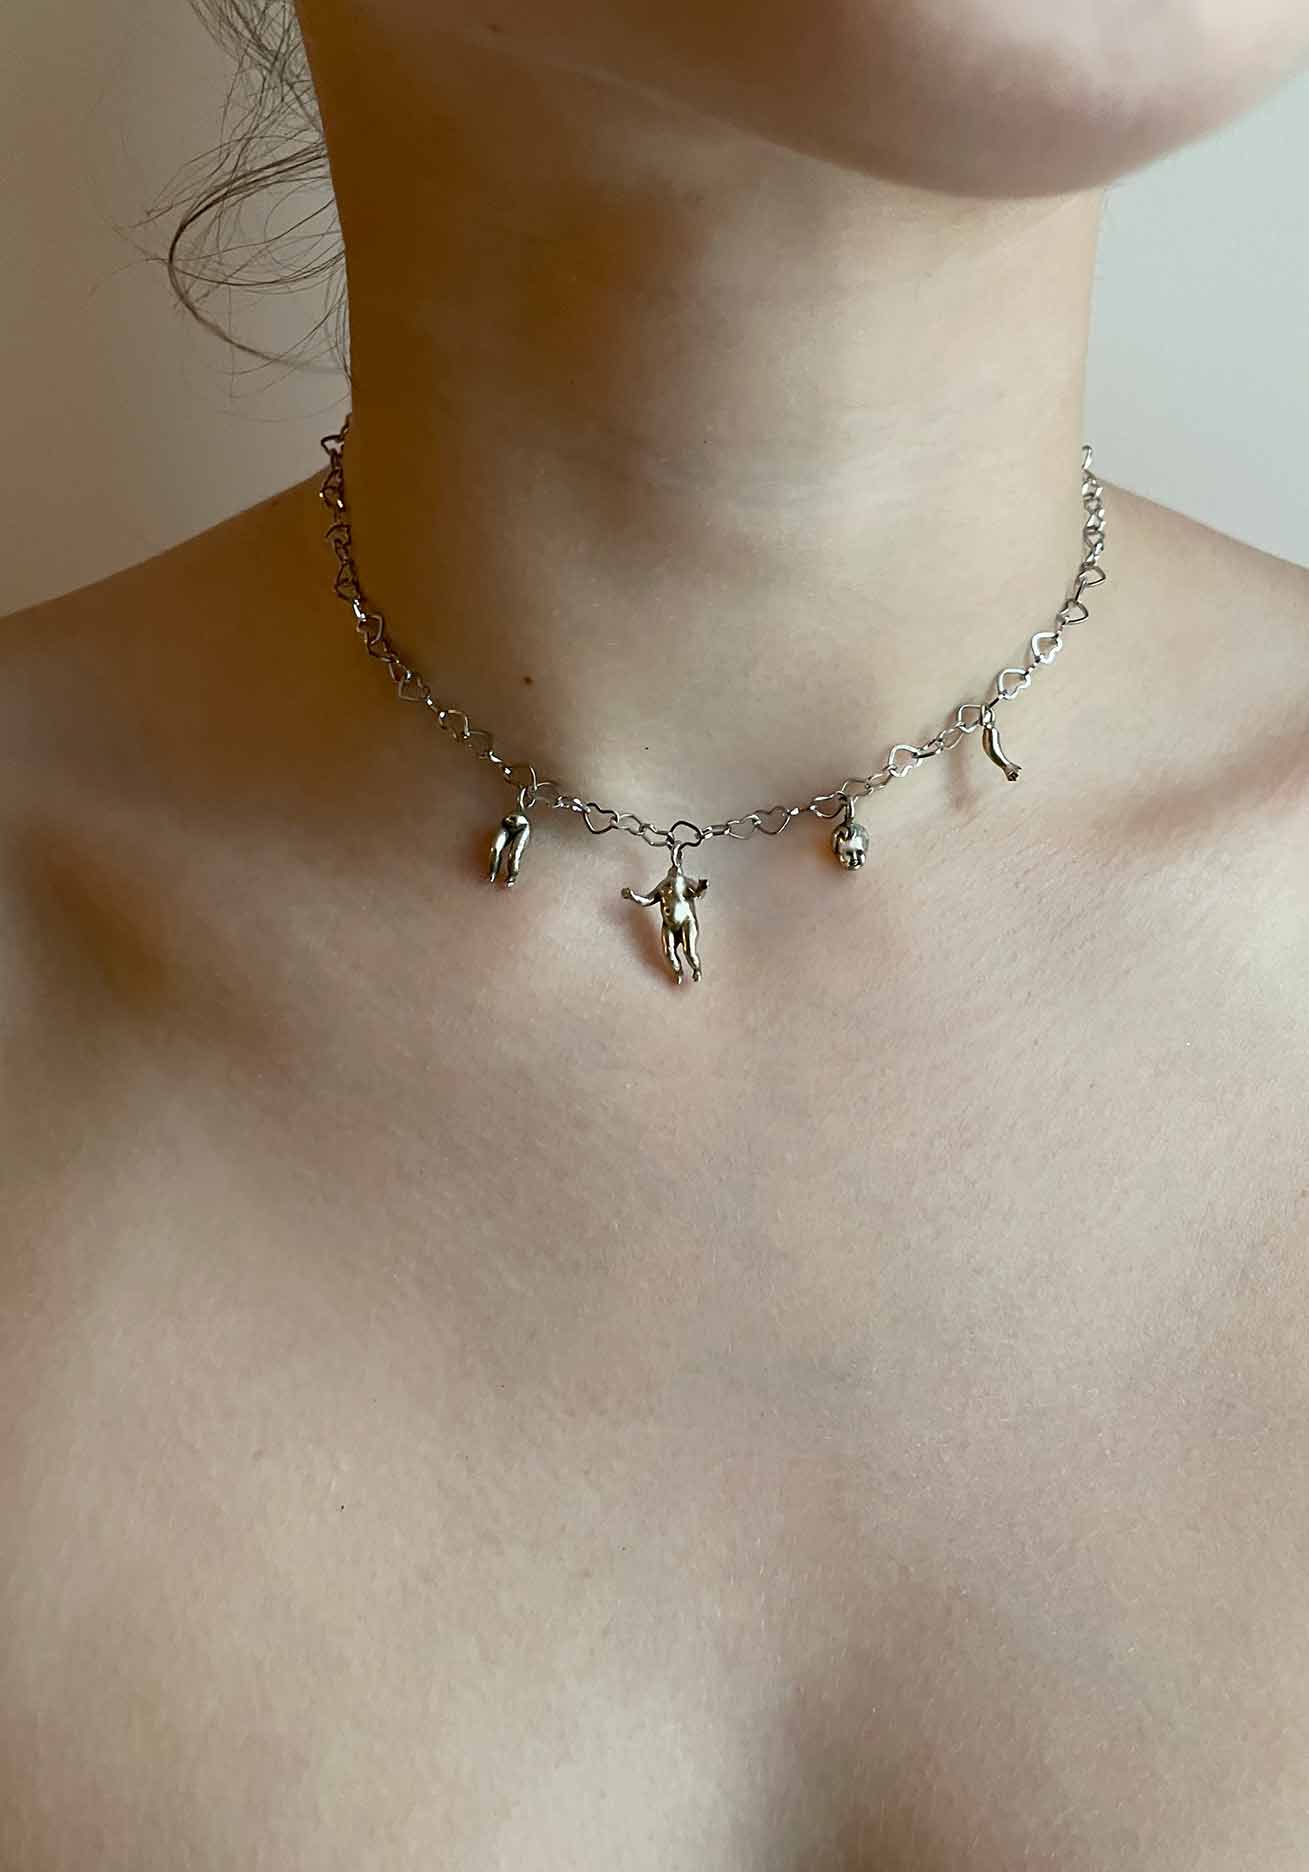 Parts Of Four Charm Chain Choker Necklace - Farfetch